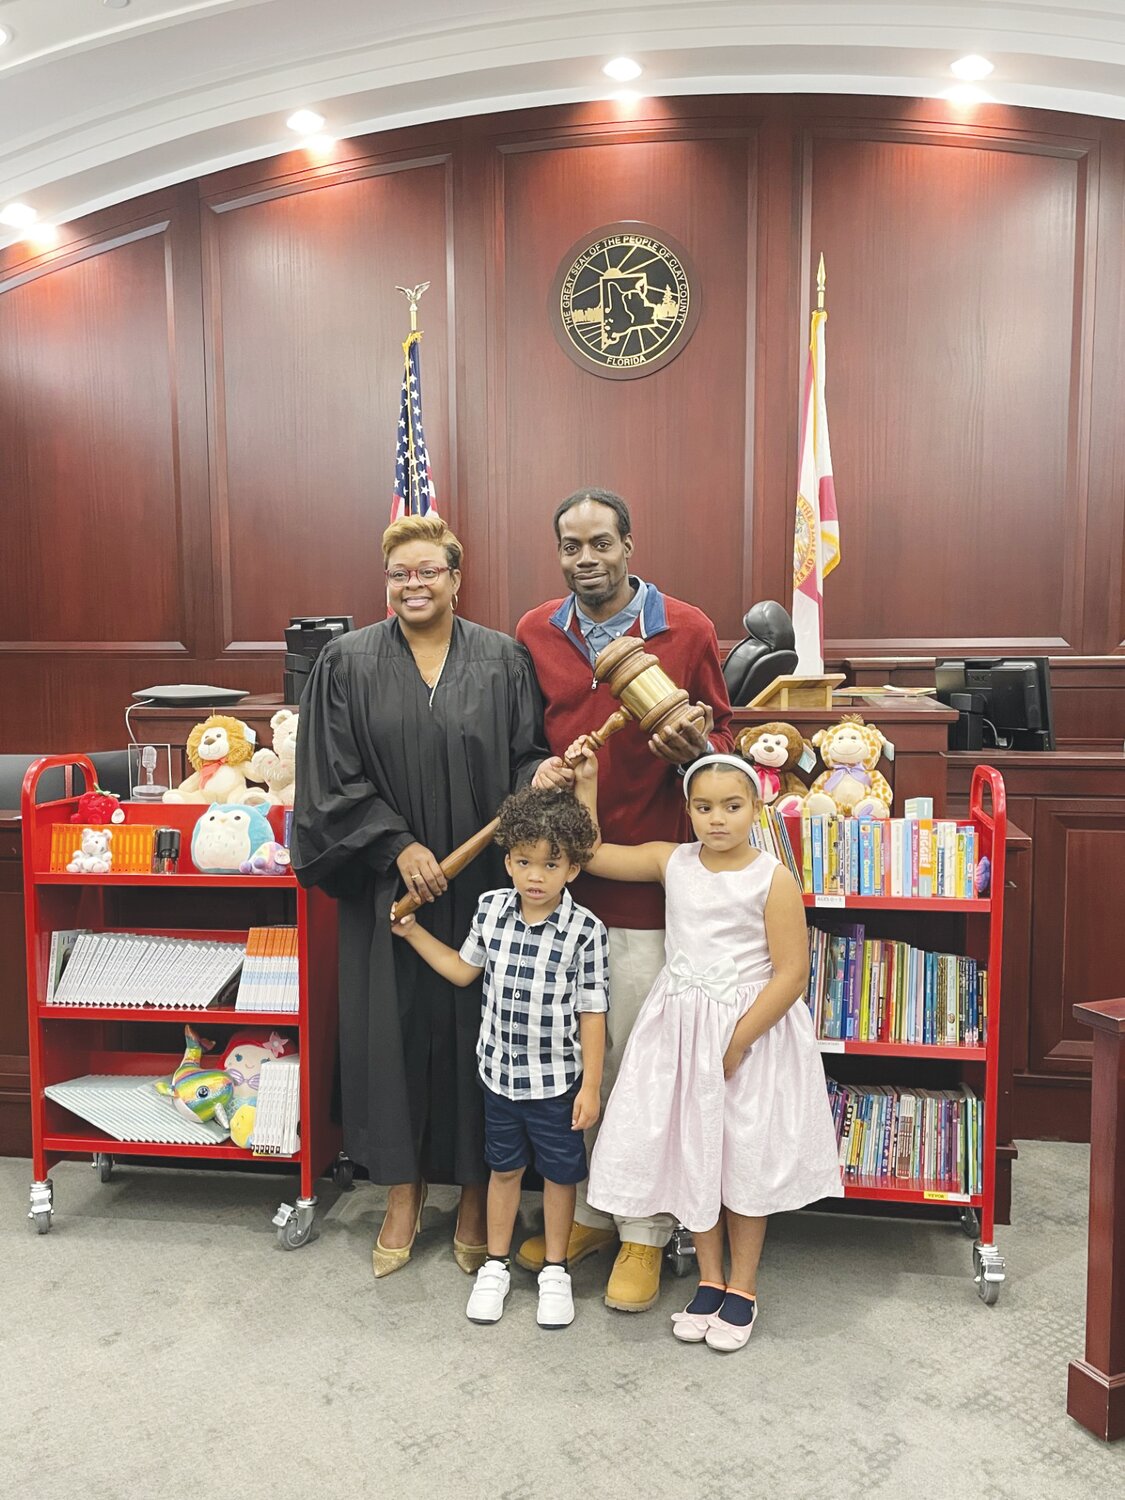 Cox and the Sweeting family – Clint (behind), Donovan (front), Kalina (right) – pose with a ceremonial gavel in the courtroom. Afterward, Donovan and Kalina were invited to a book and stuffed animal, too.